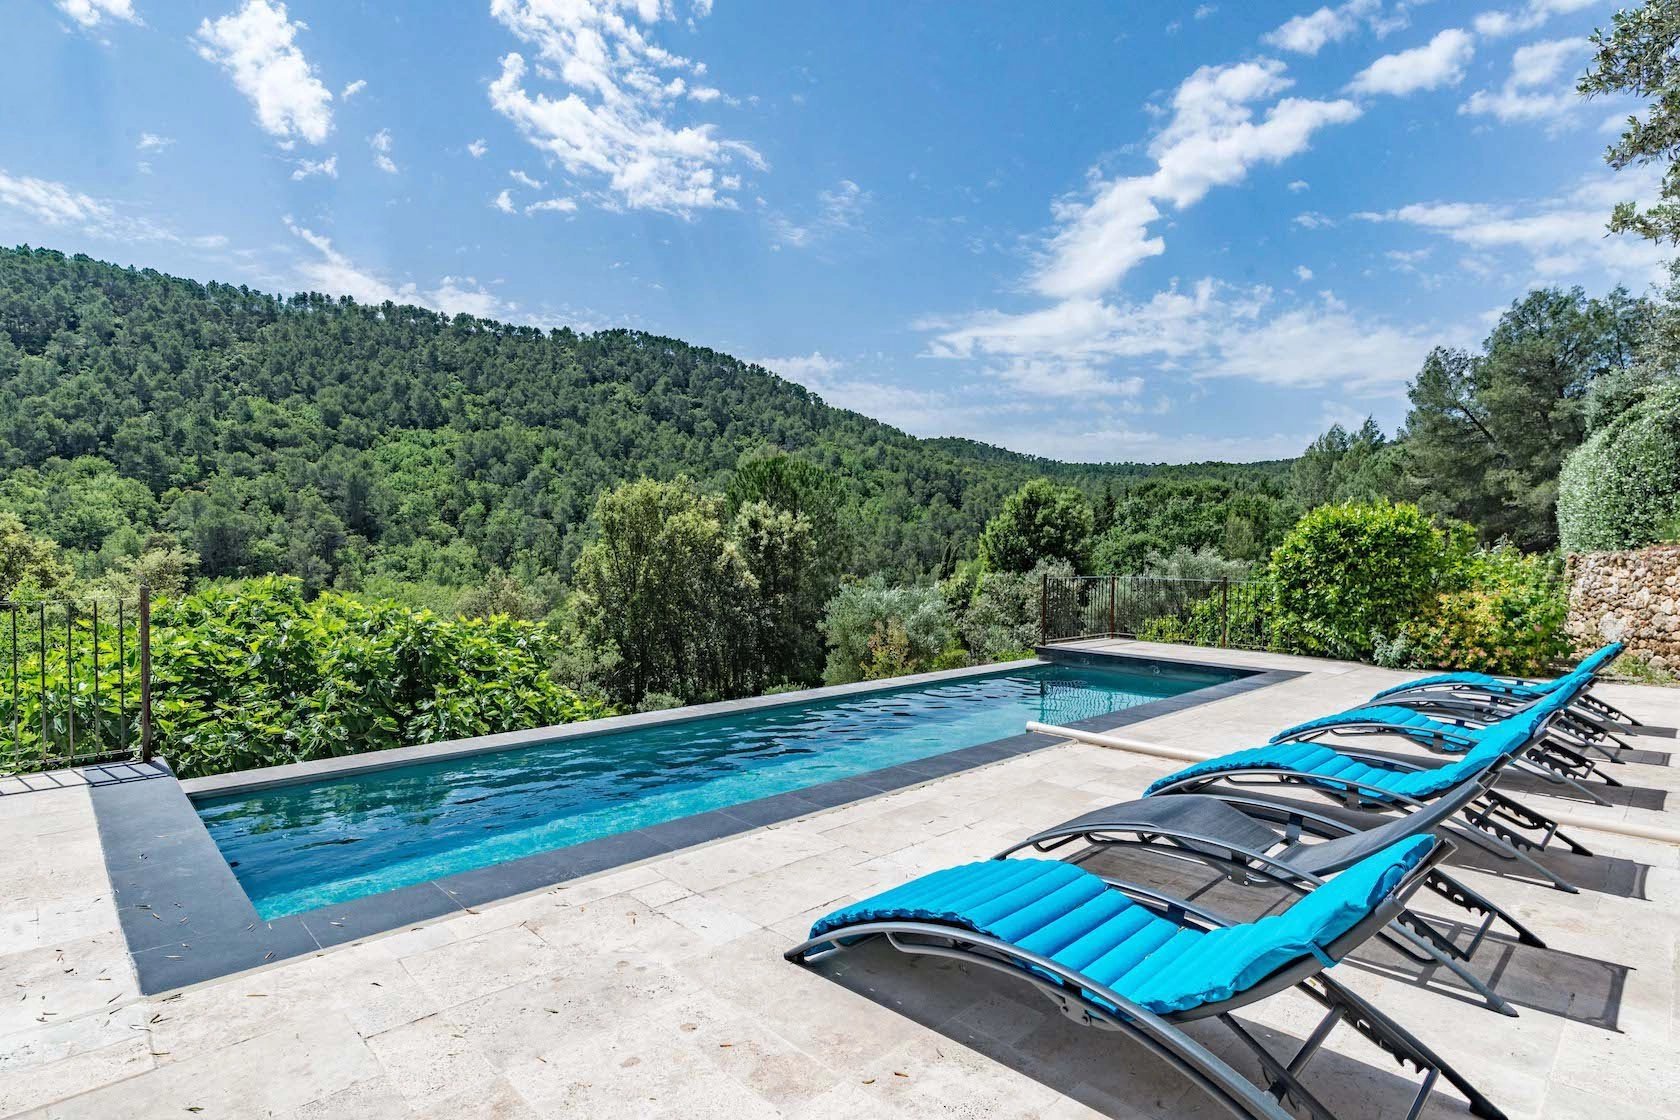 Provencal villa with infinity pool